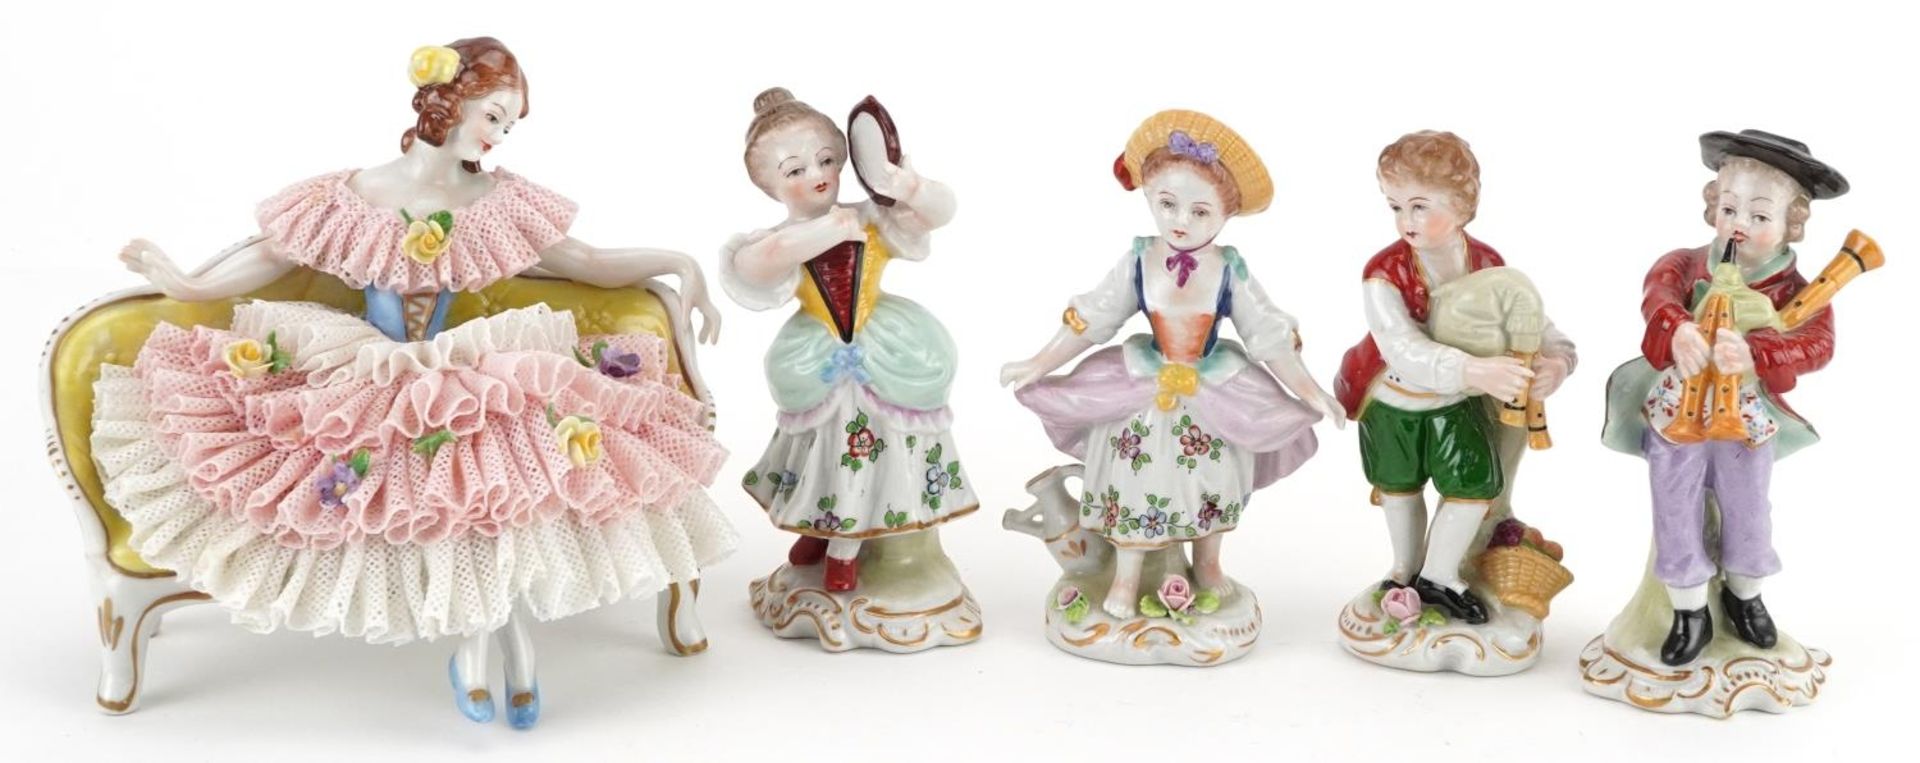 German porcelain comprising four Dresden figurines and a lace figurine in the form of a female on